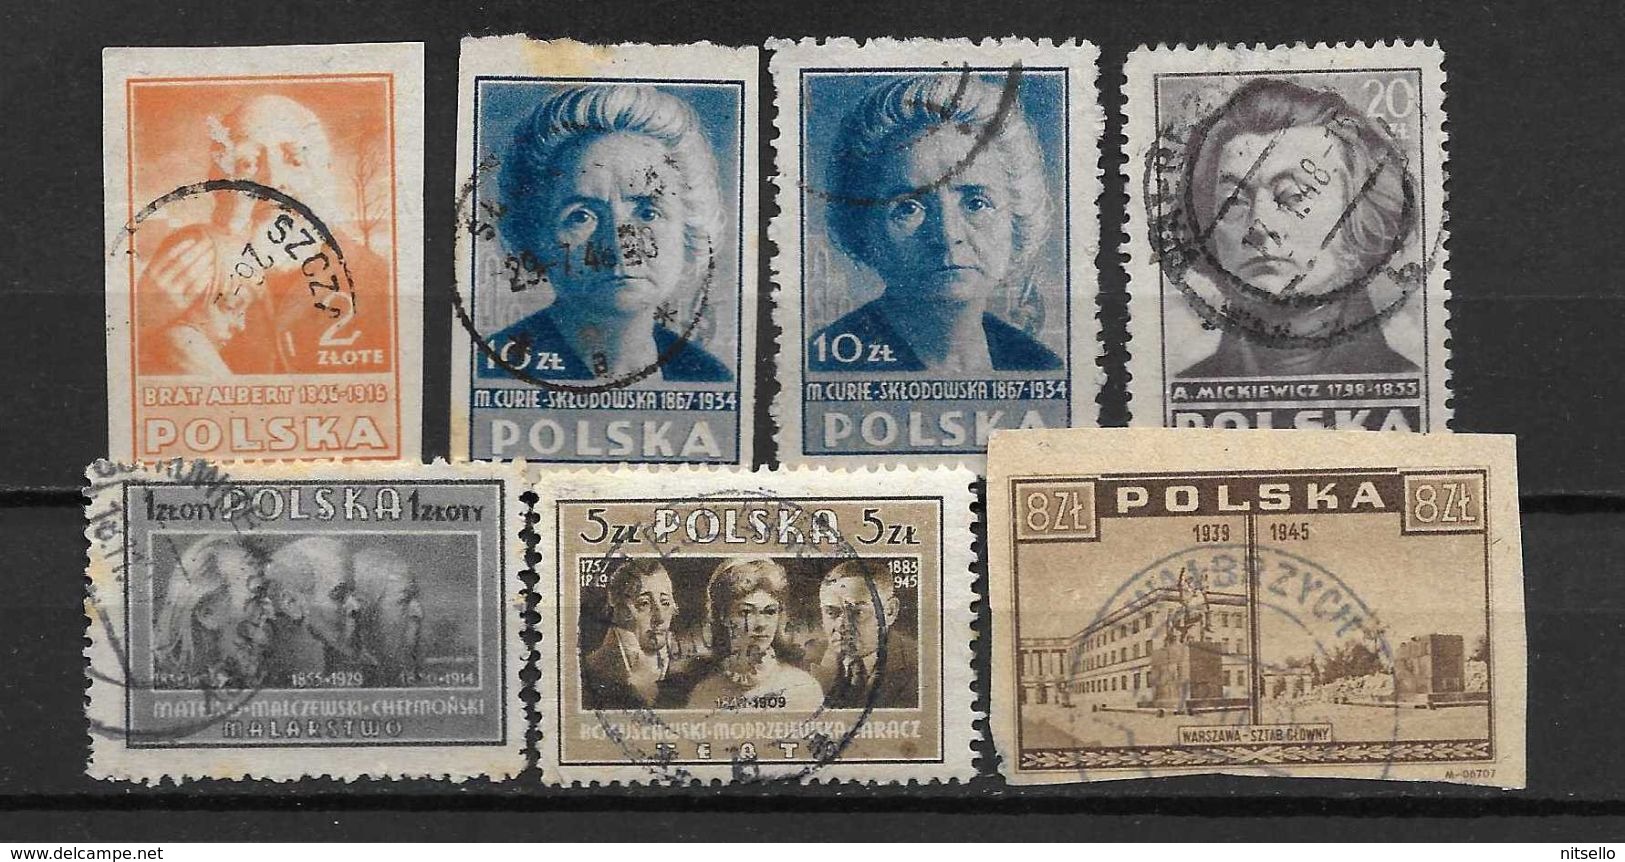 LOTE 1787  ///  POLONIA 1947             ¡¡¡¡ LIQUIDATION !!!! - Used Stamps